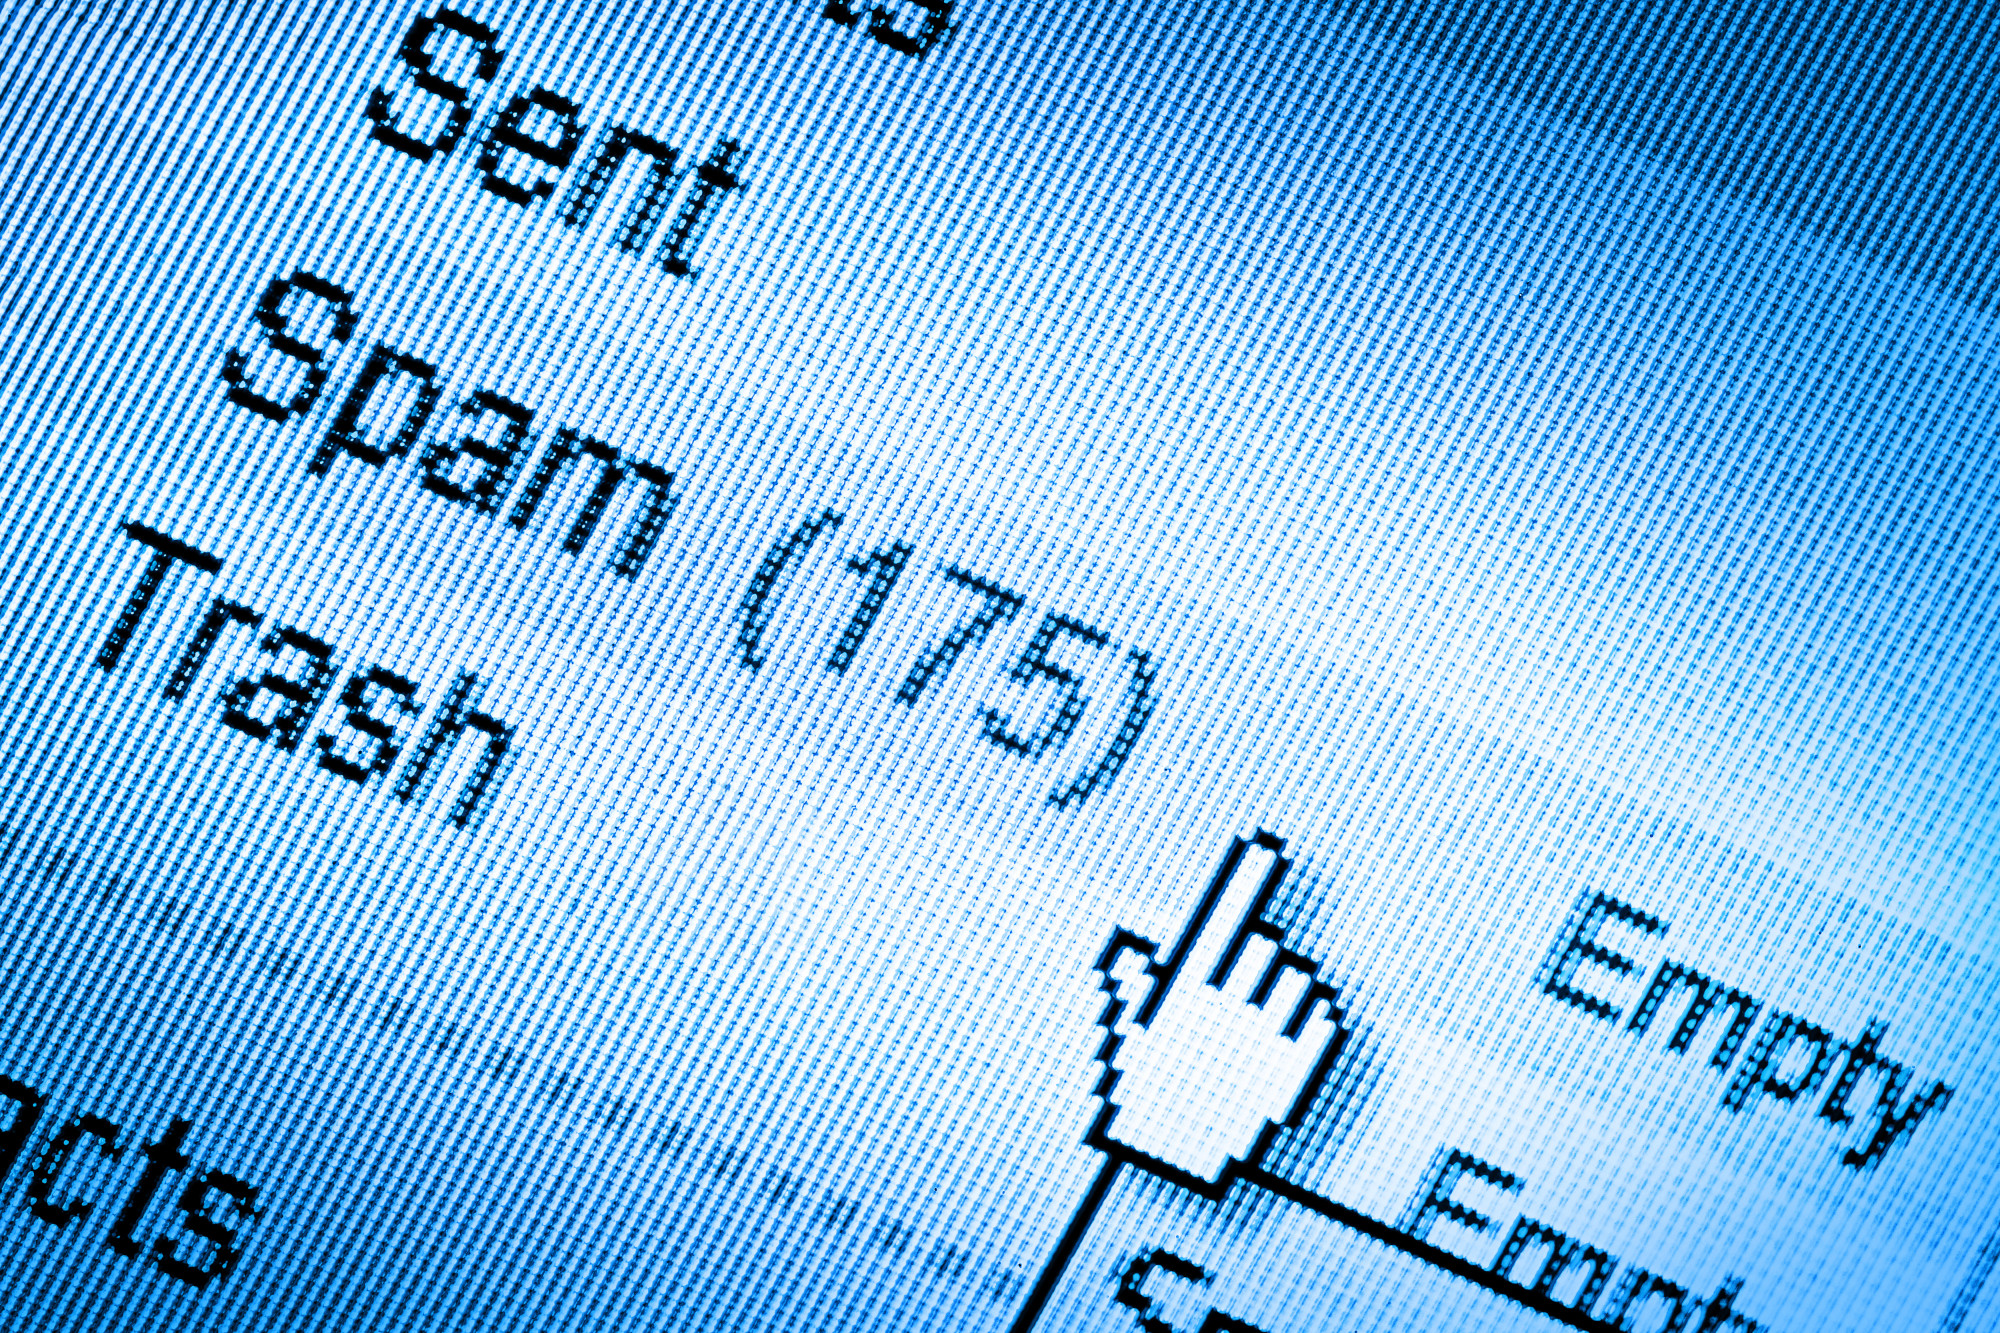 Keep Your Small Business Emails Out of The Spam Folder Using These Tips